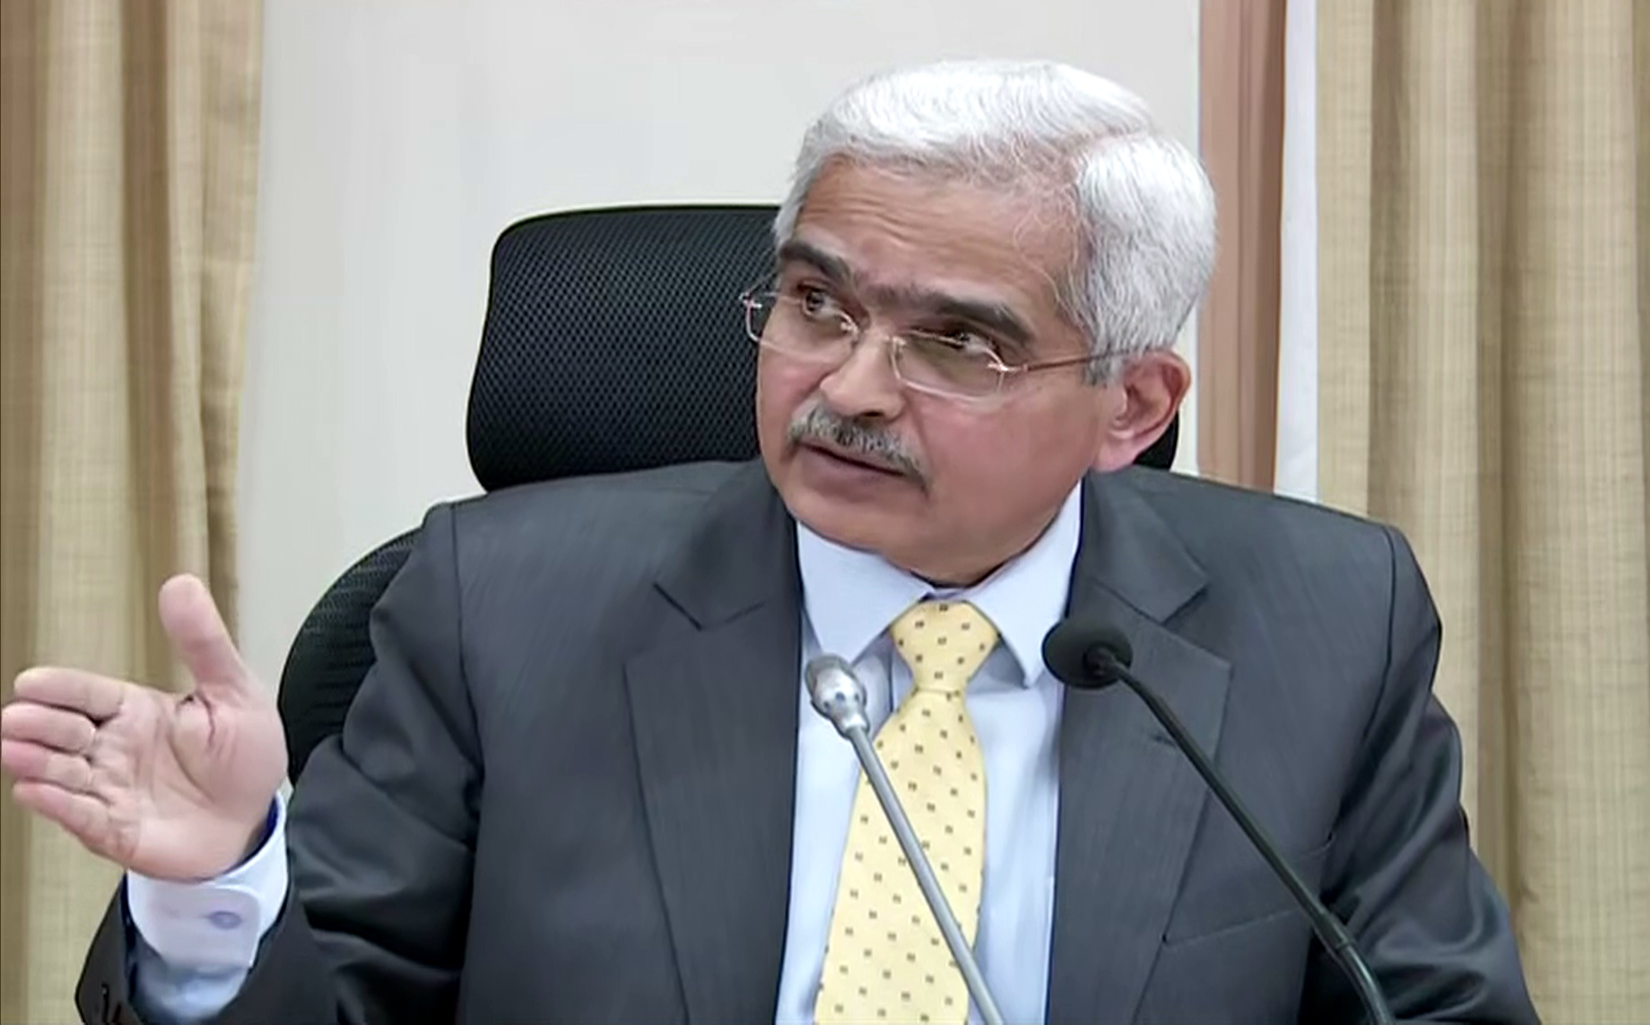 India's financial system sound, lenders should not be extremely risk averse: RBI Guv